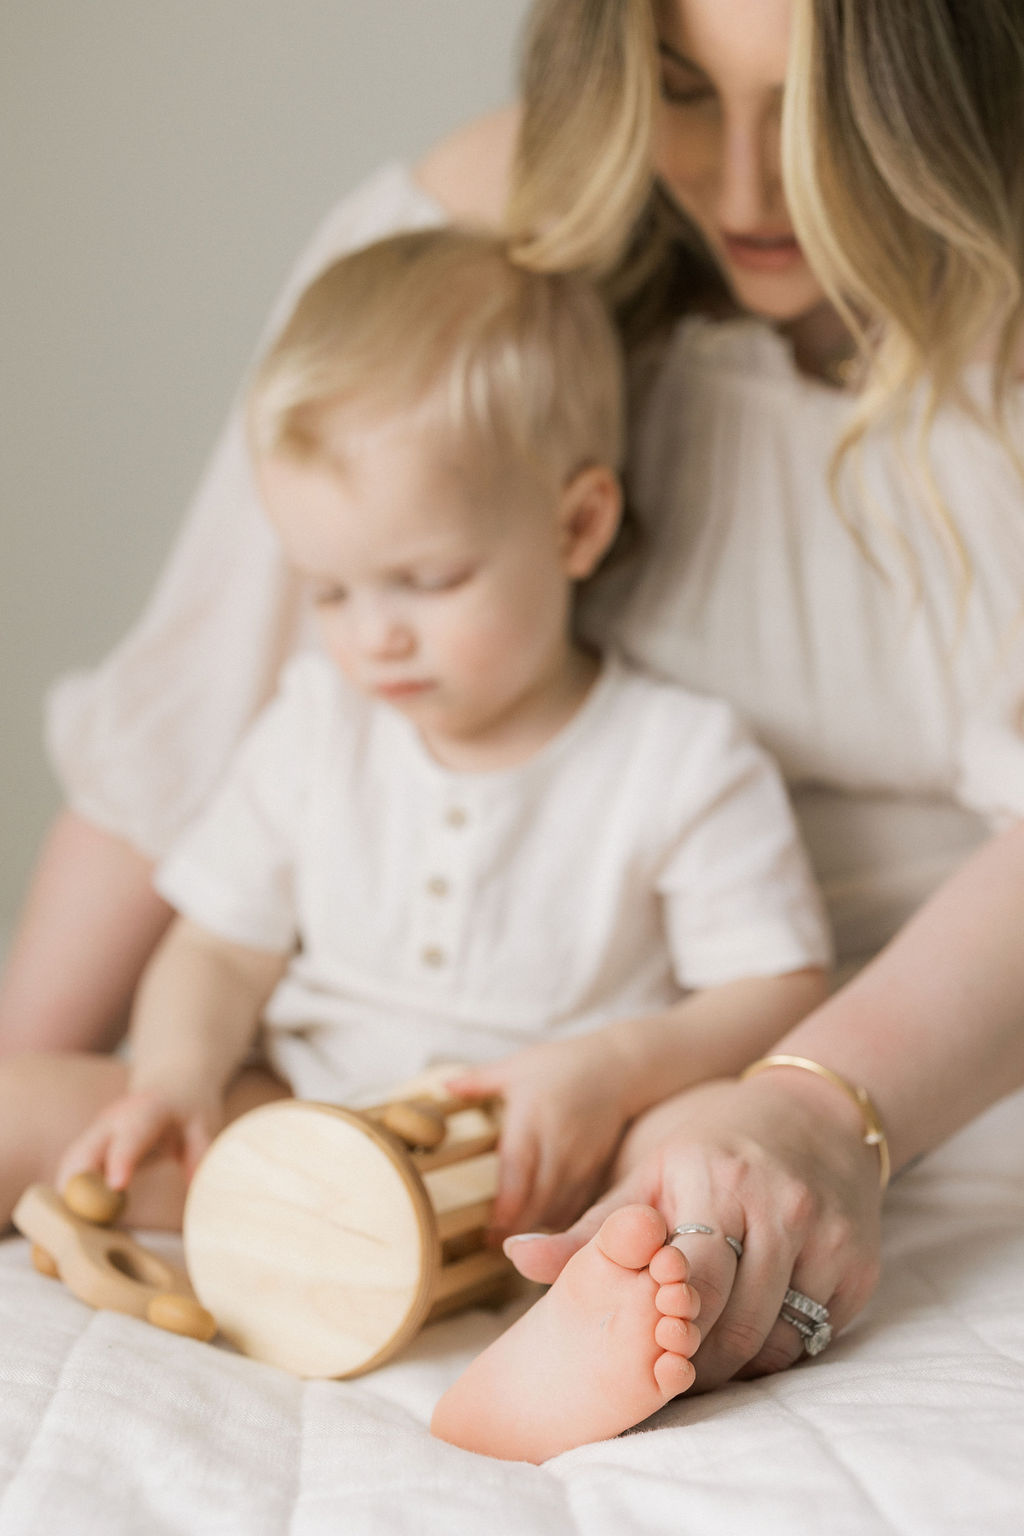 A young boy sits with mom on a bed playing with wooden toys